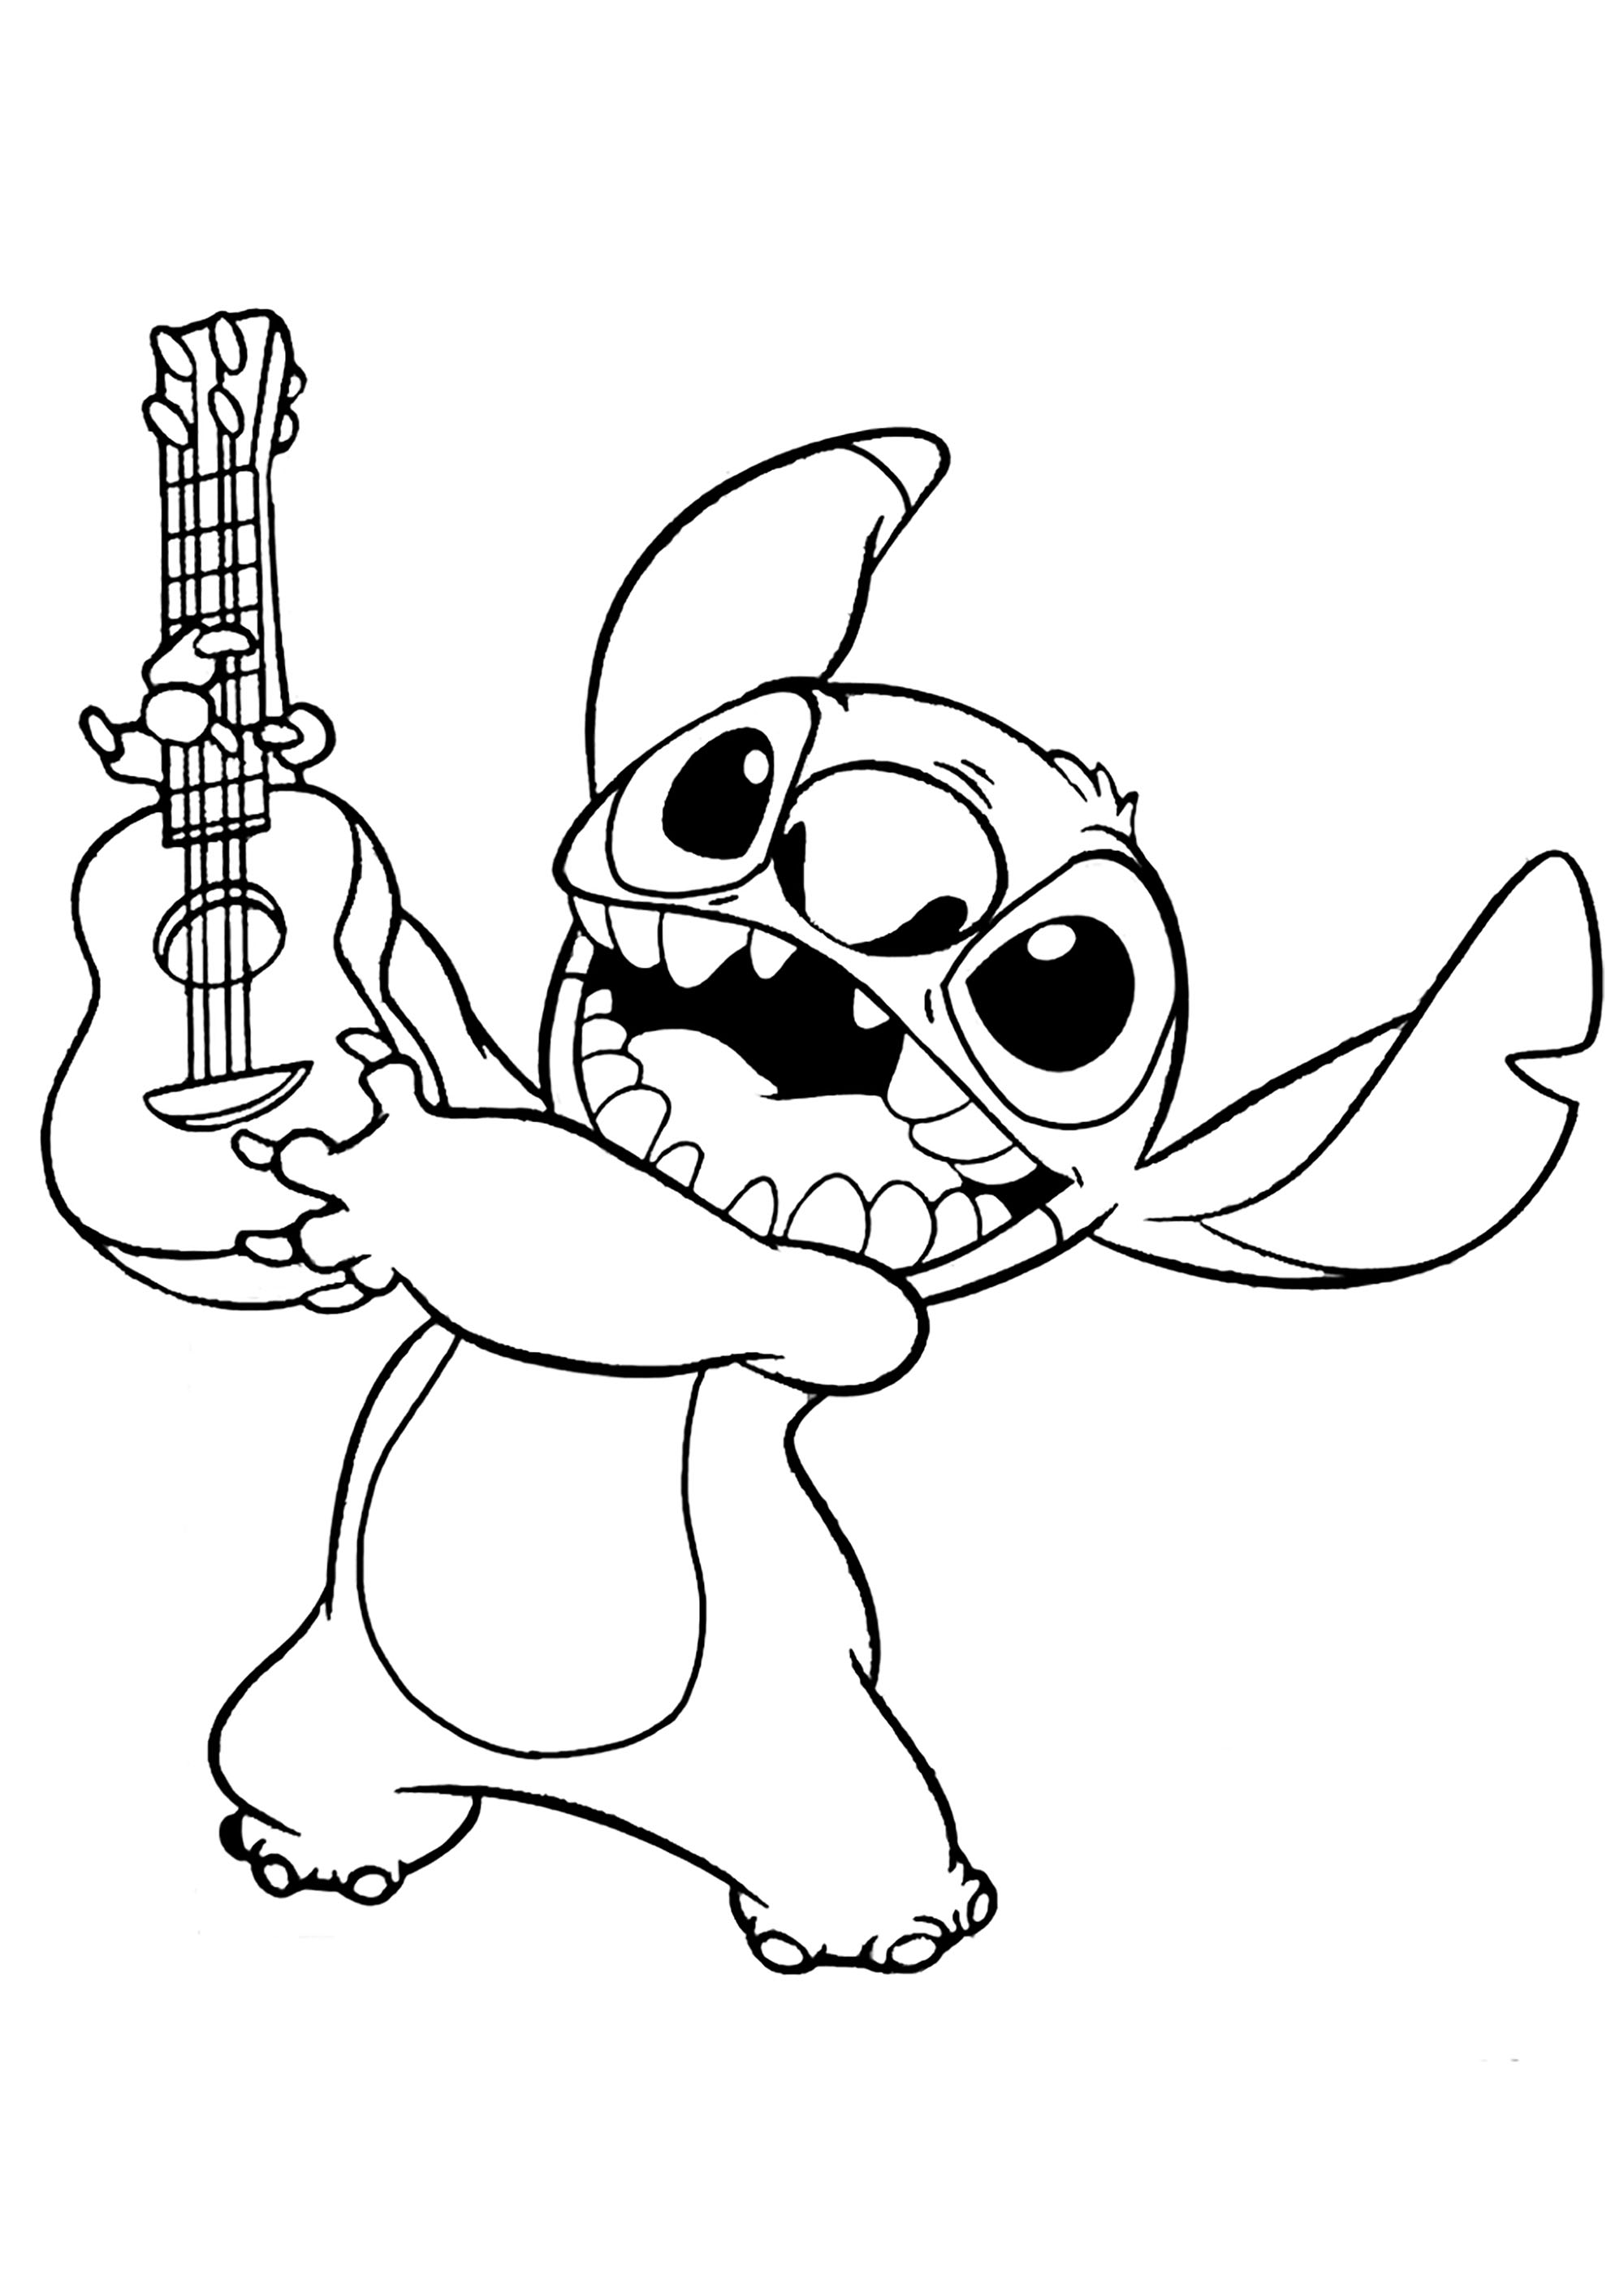 586 Simple Lilo Coloring Page with Animal character